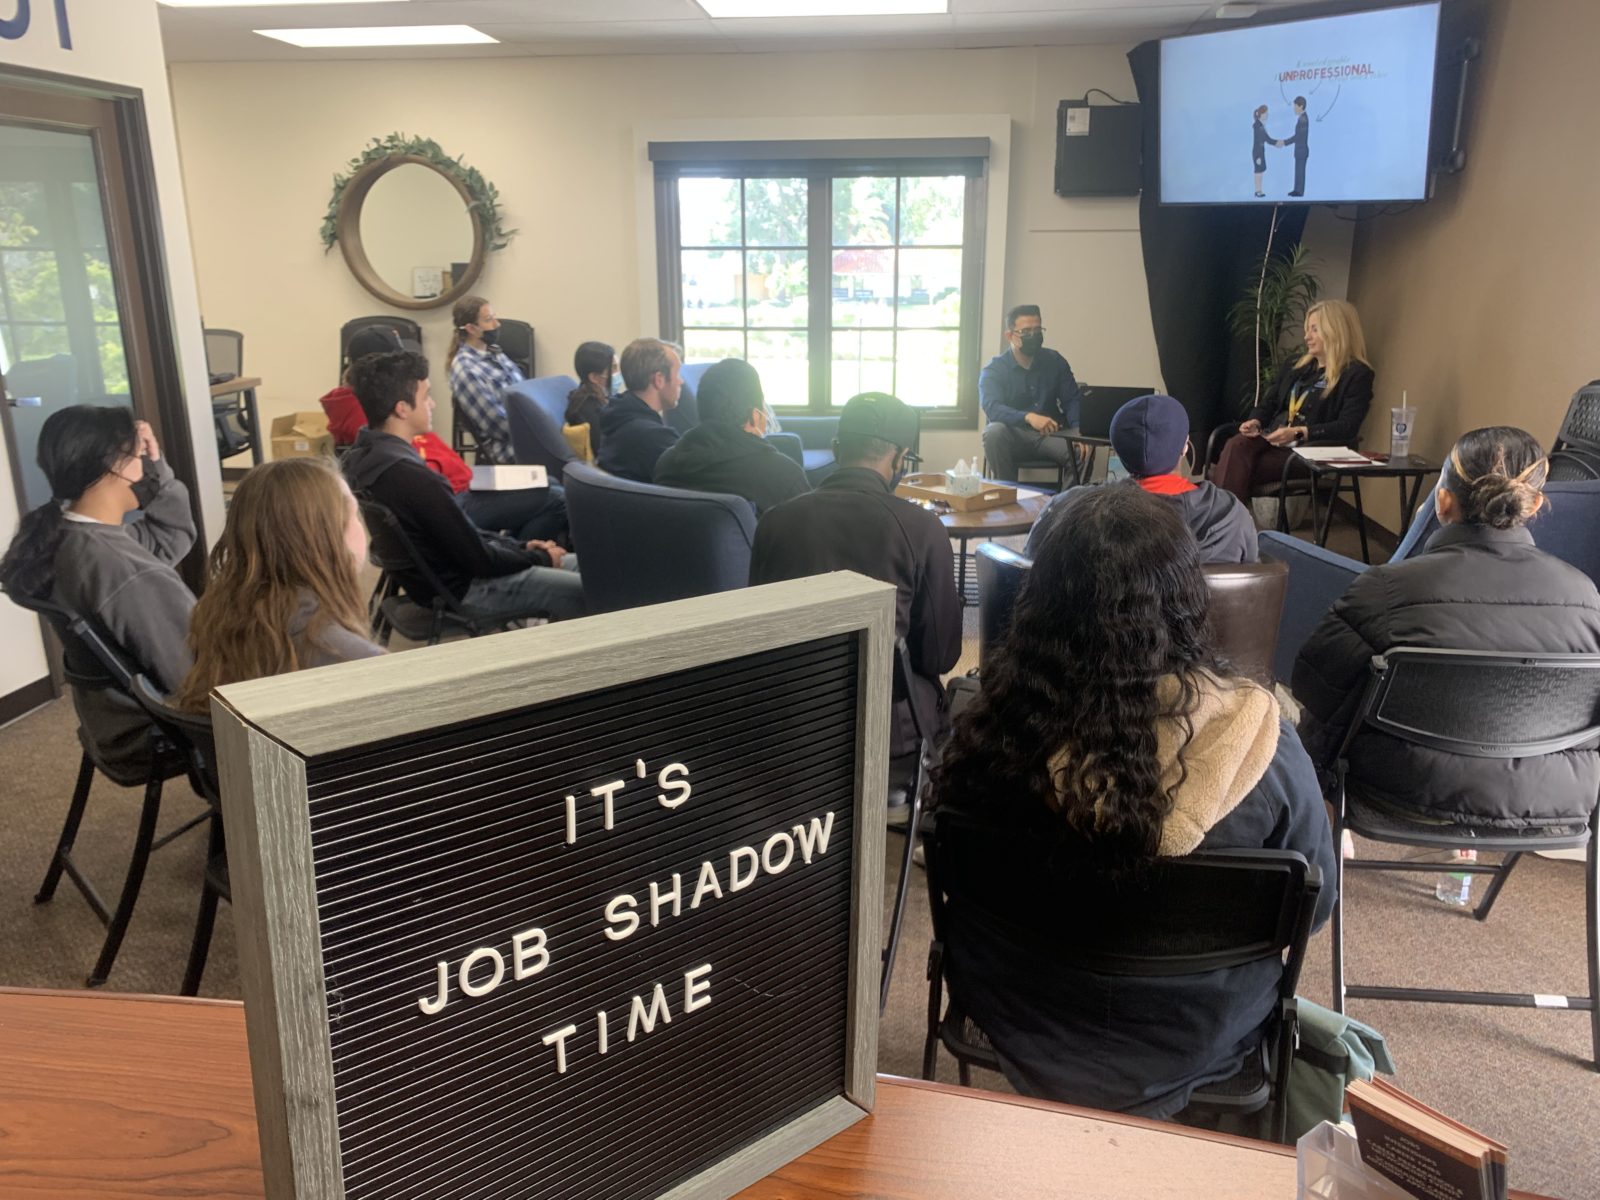 Job Shadow: A Transformational Student Experience